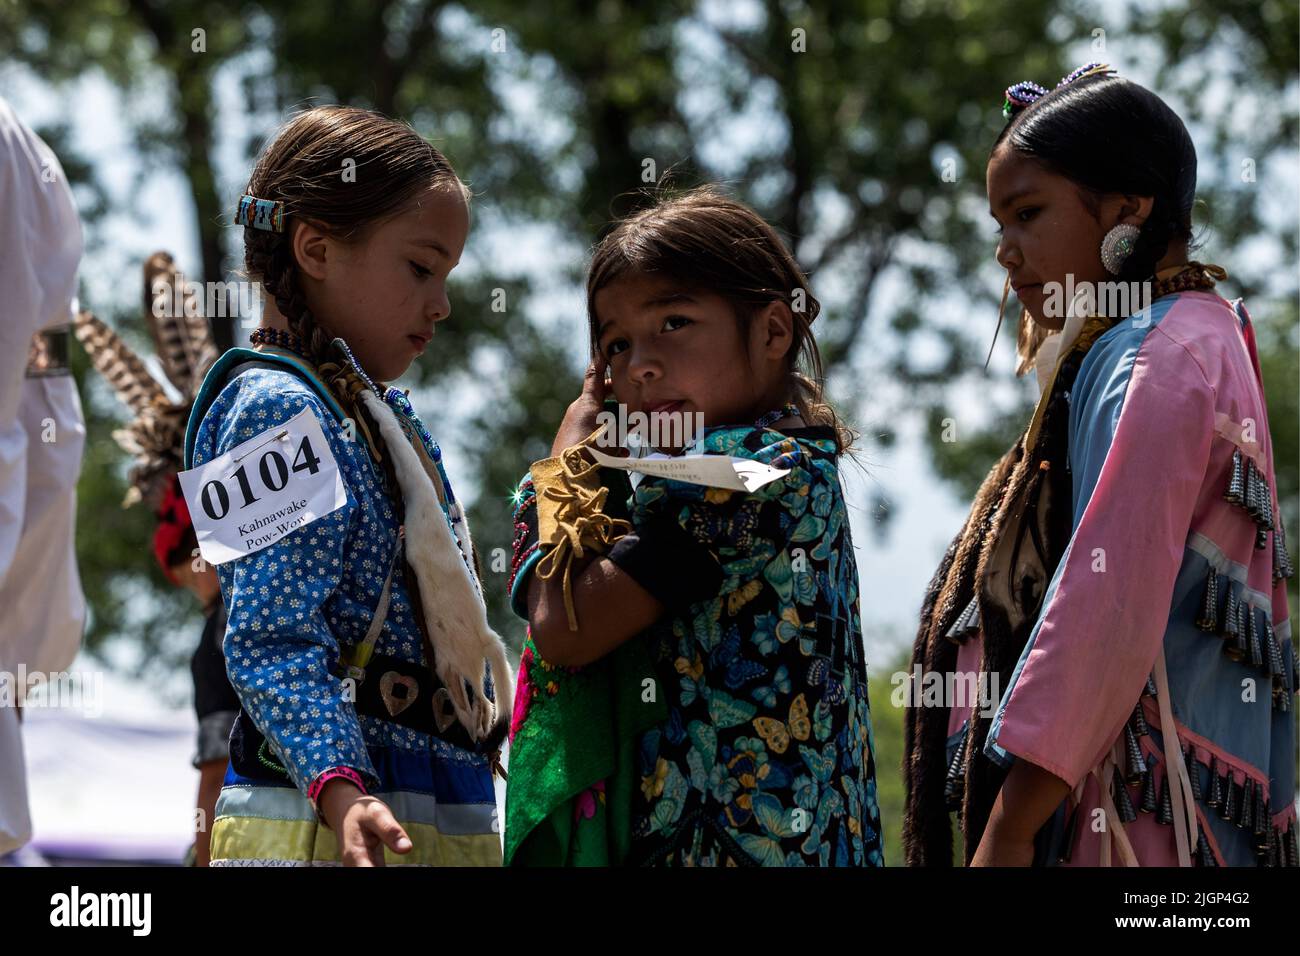 Children waiting for their turn in the arena during the festival. Stock Photo